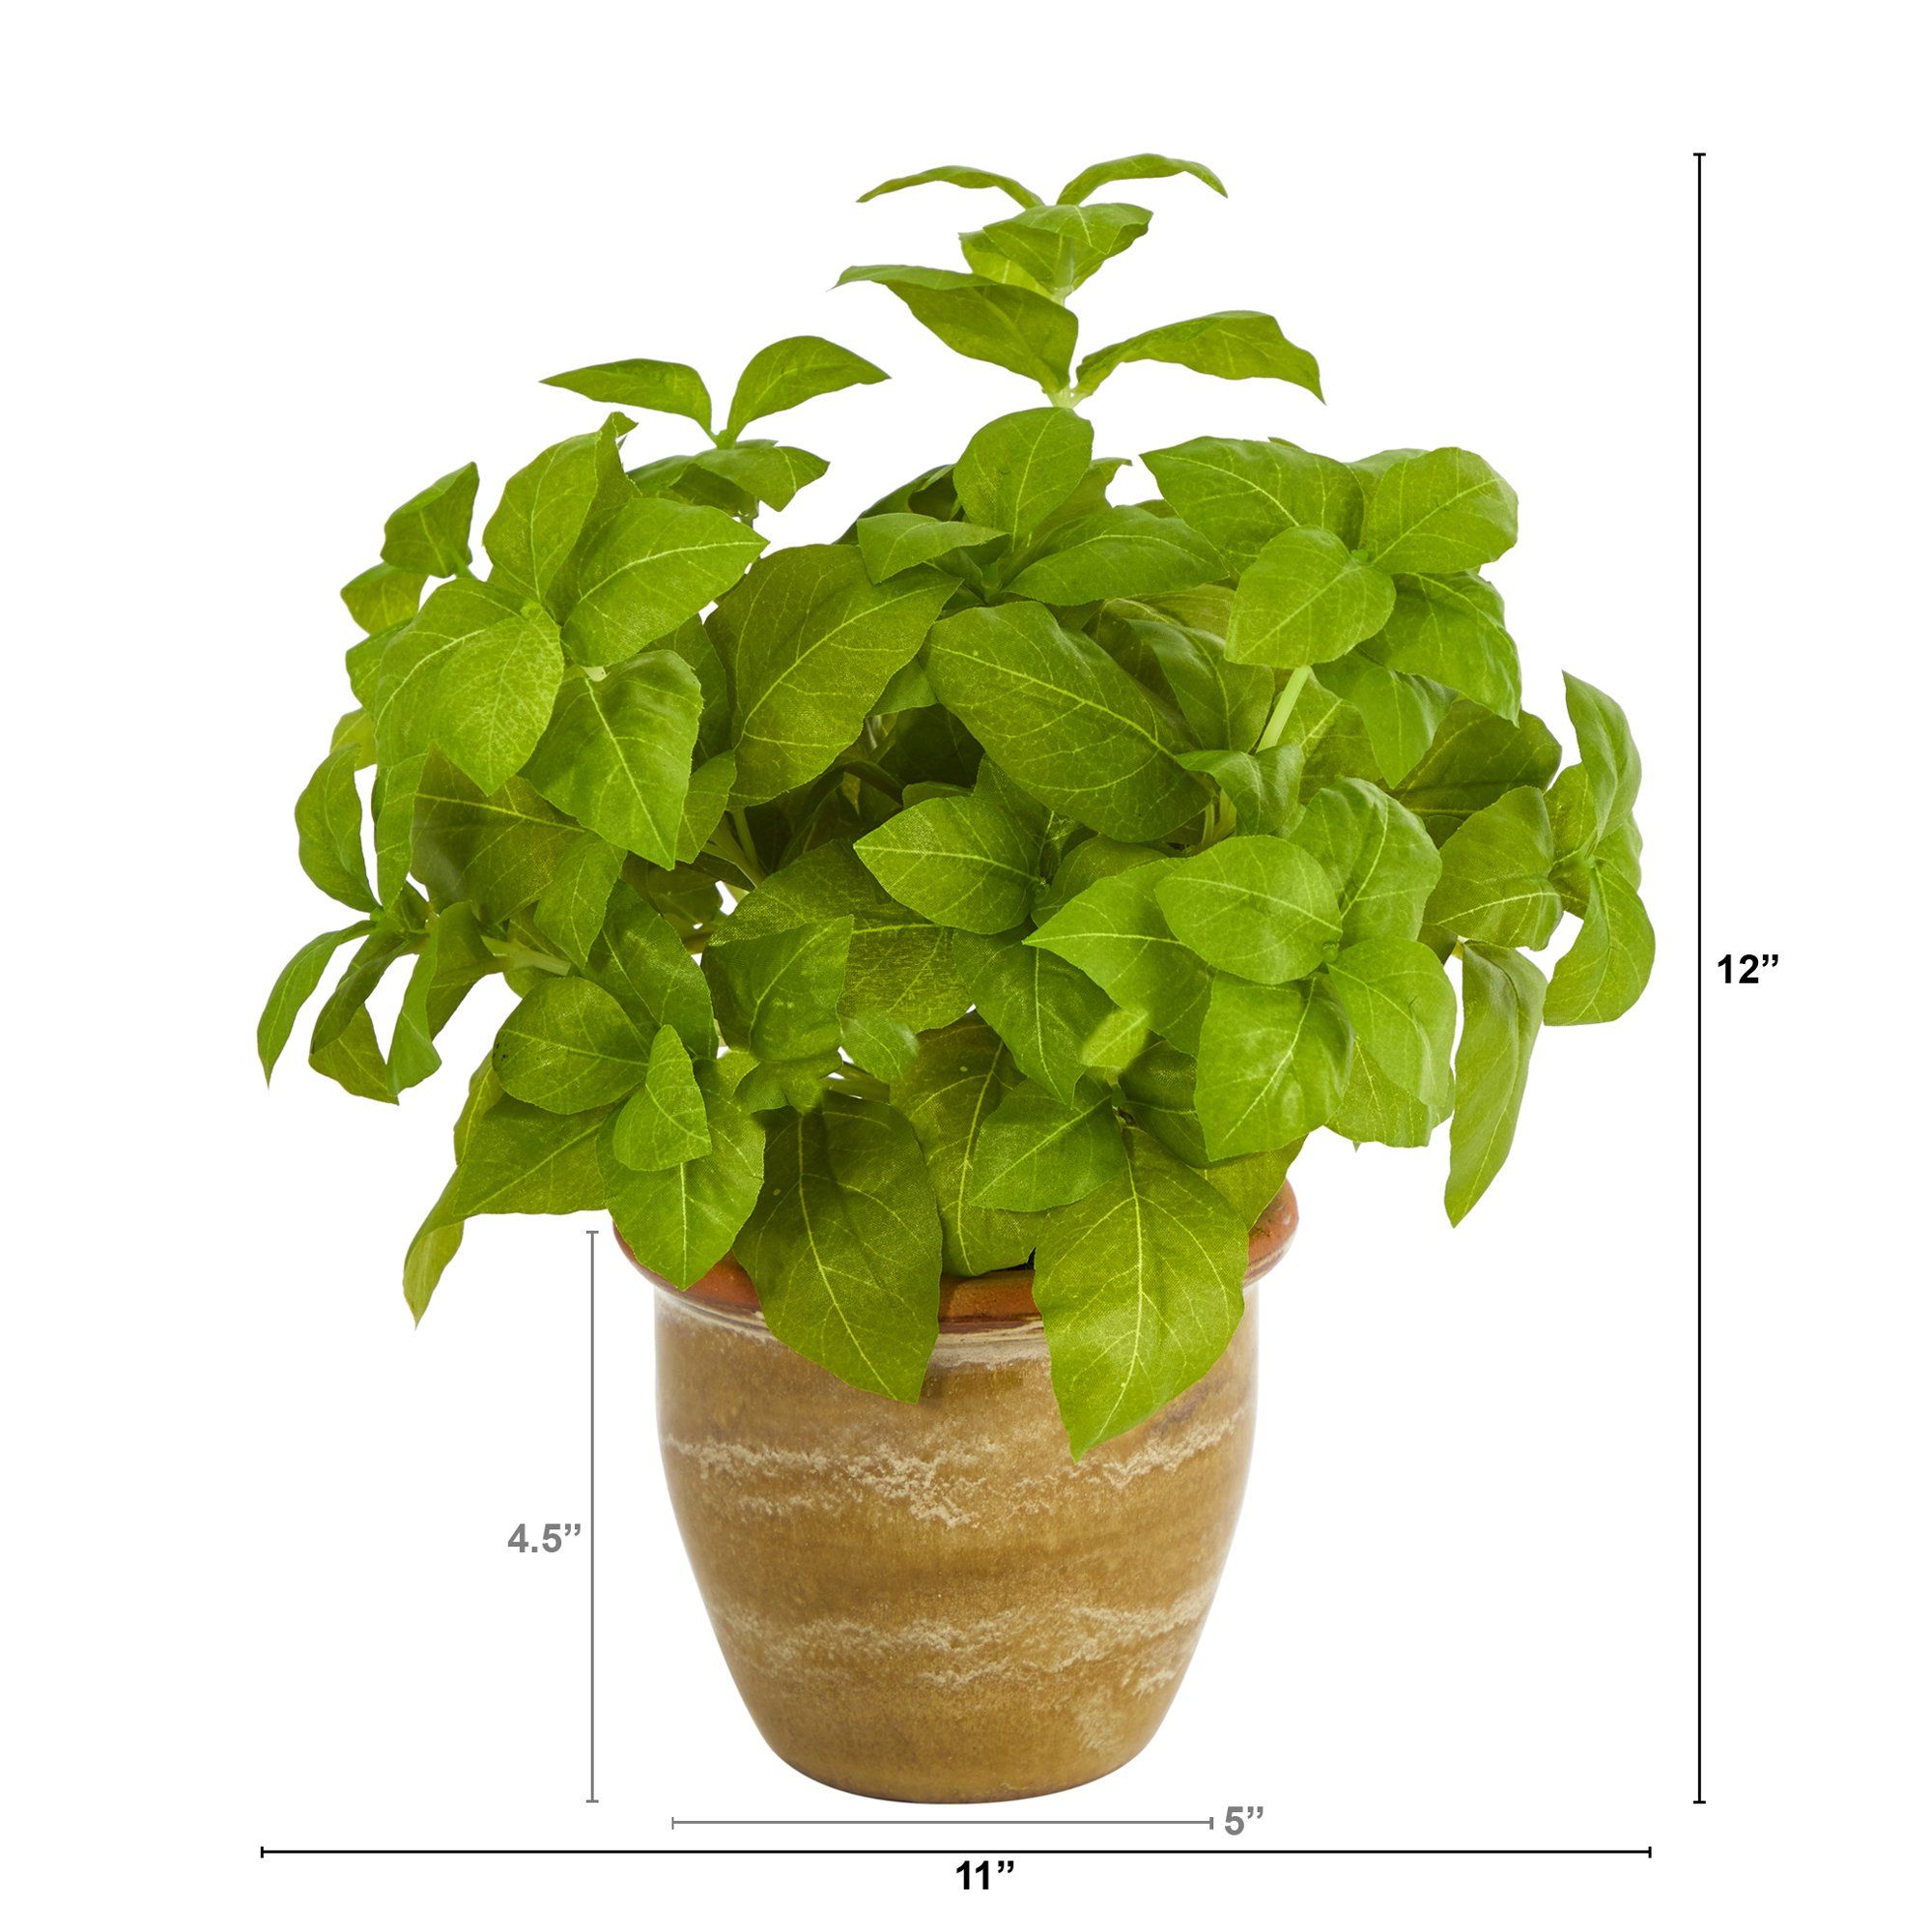 Artificial Arrangement - 12” Basil Plant in Ceramic Planter by Nearly Natural